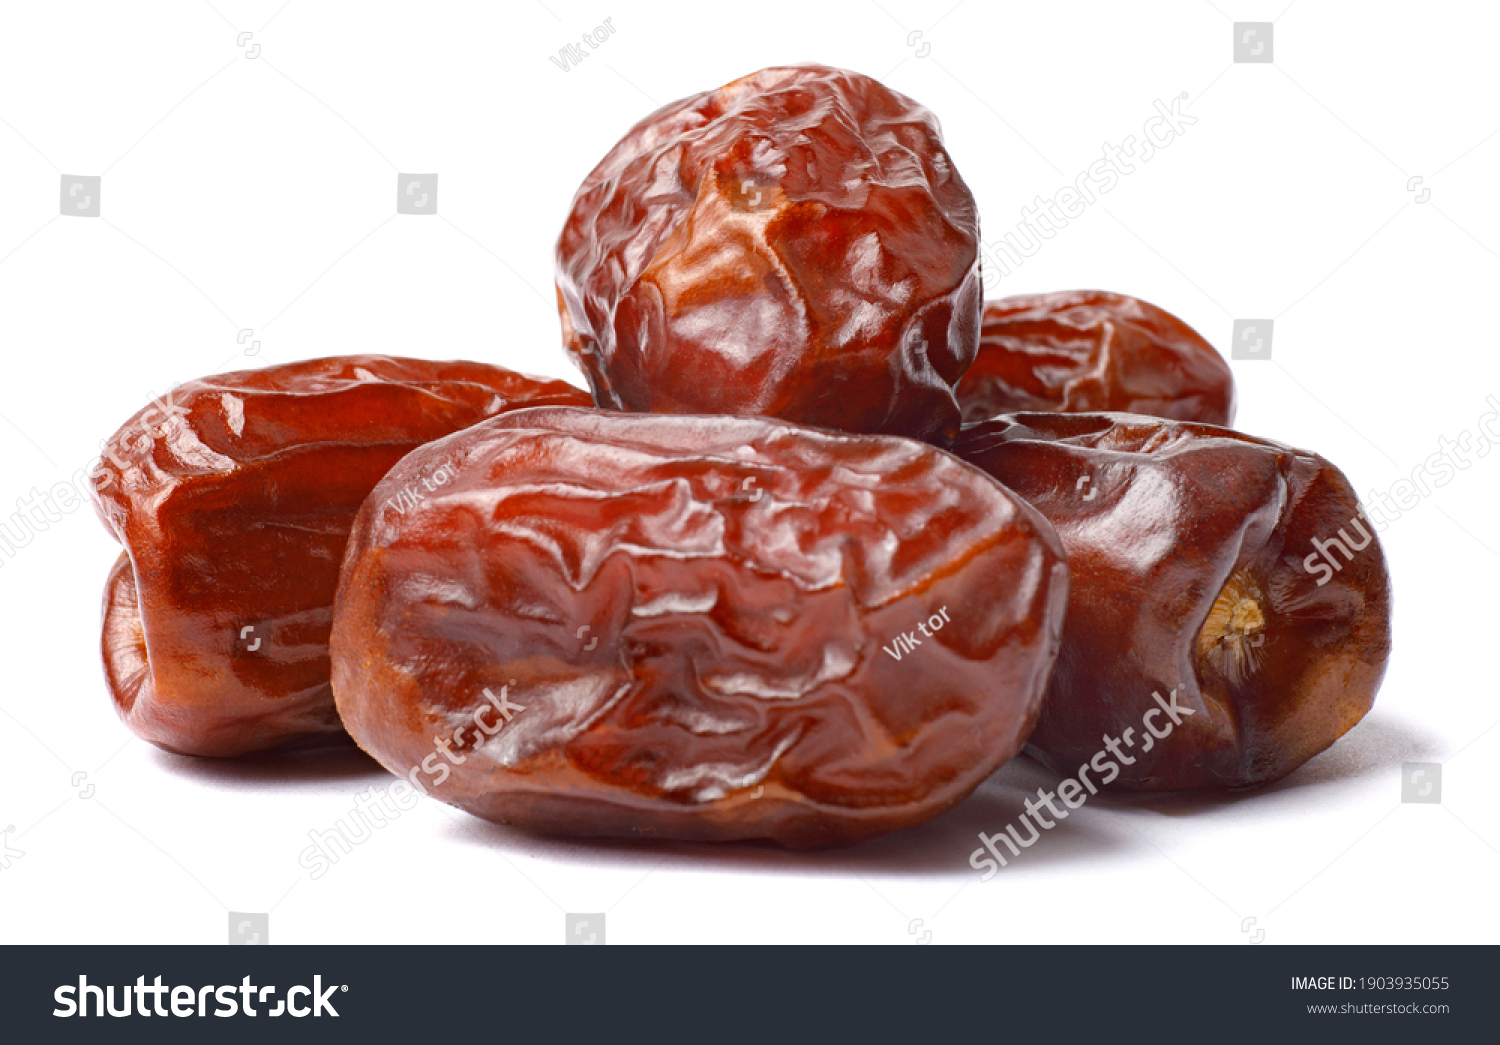 Pile of tasty dry dates isolated on white background. Arabic food #1903935055